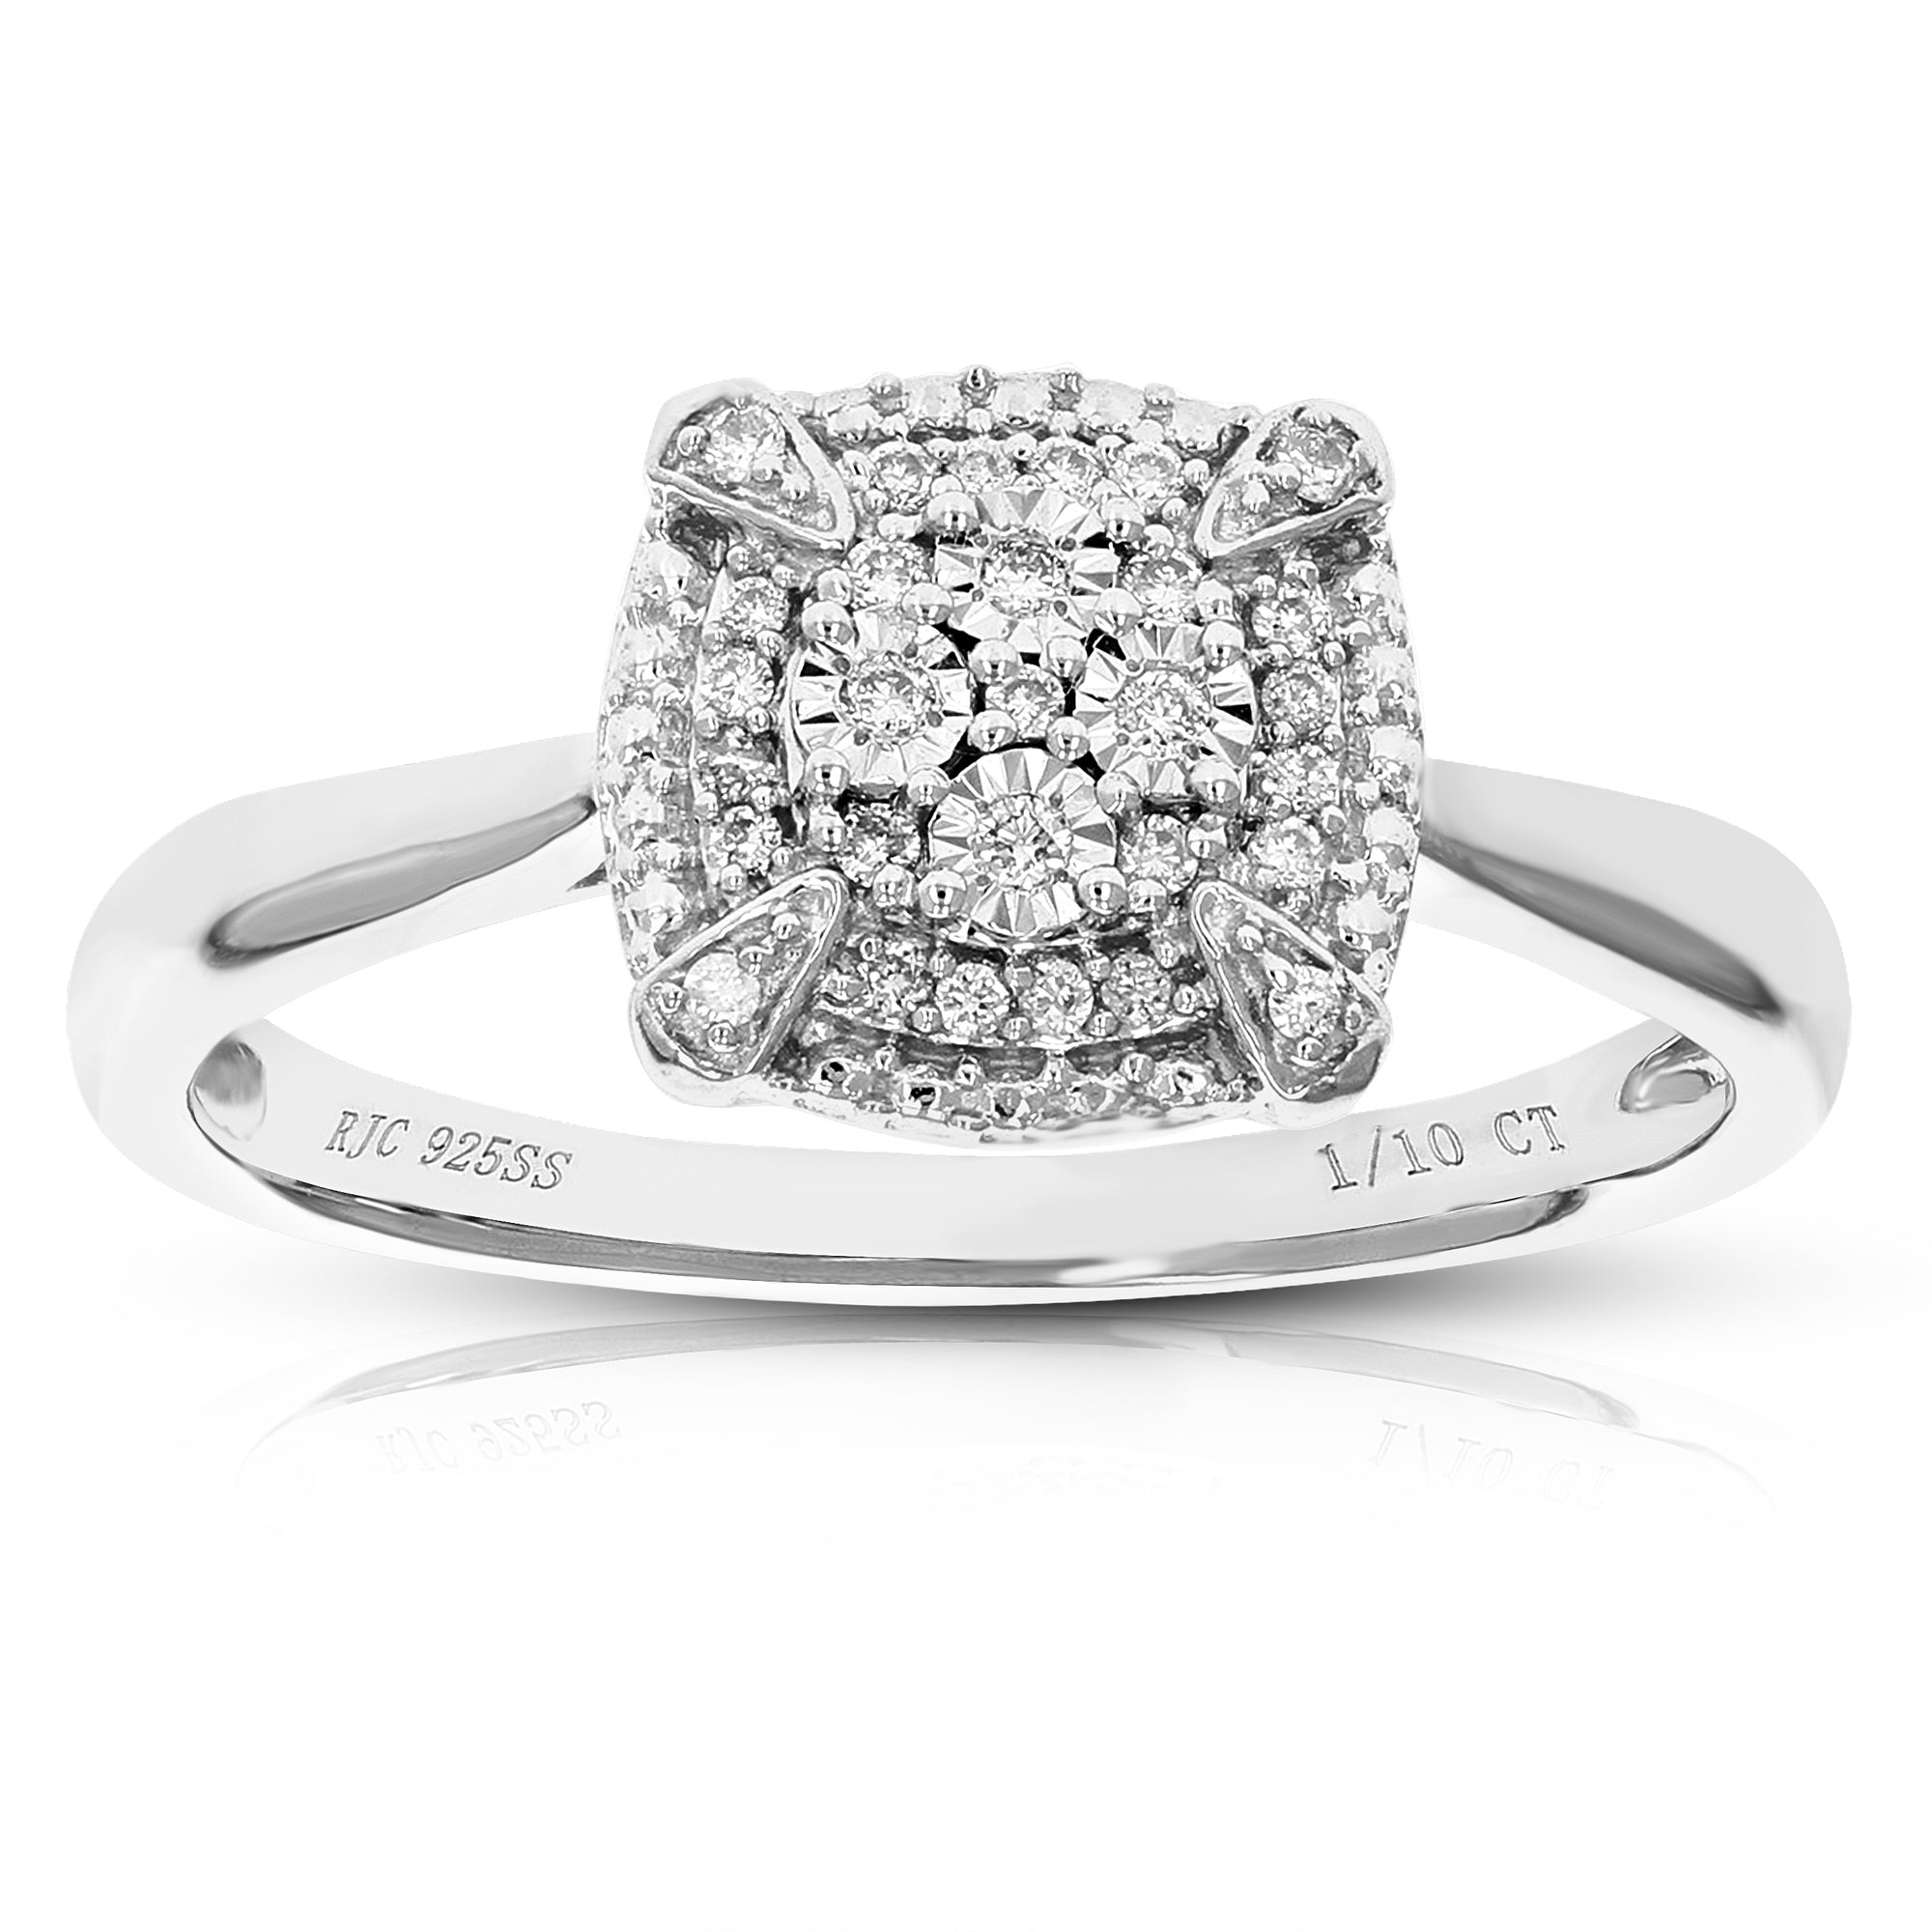 1/10 cttw Diamond Engagement Ring for Women, Round Lab Grown Diamond Ring in 0.925 Sterling Silver, Prong Setting, Size 6-8